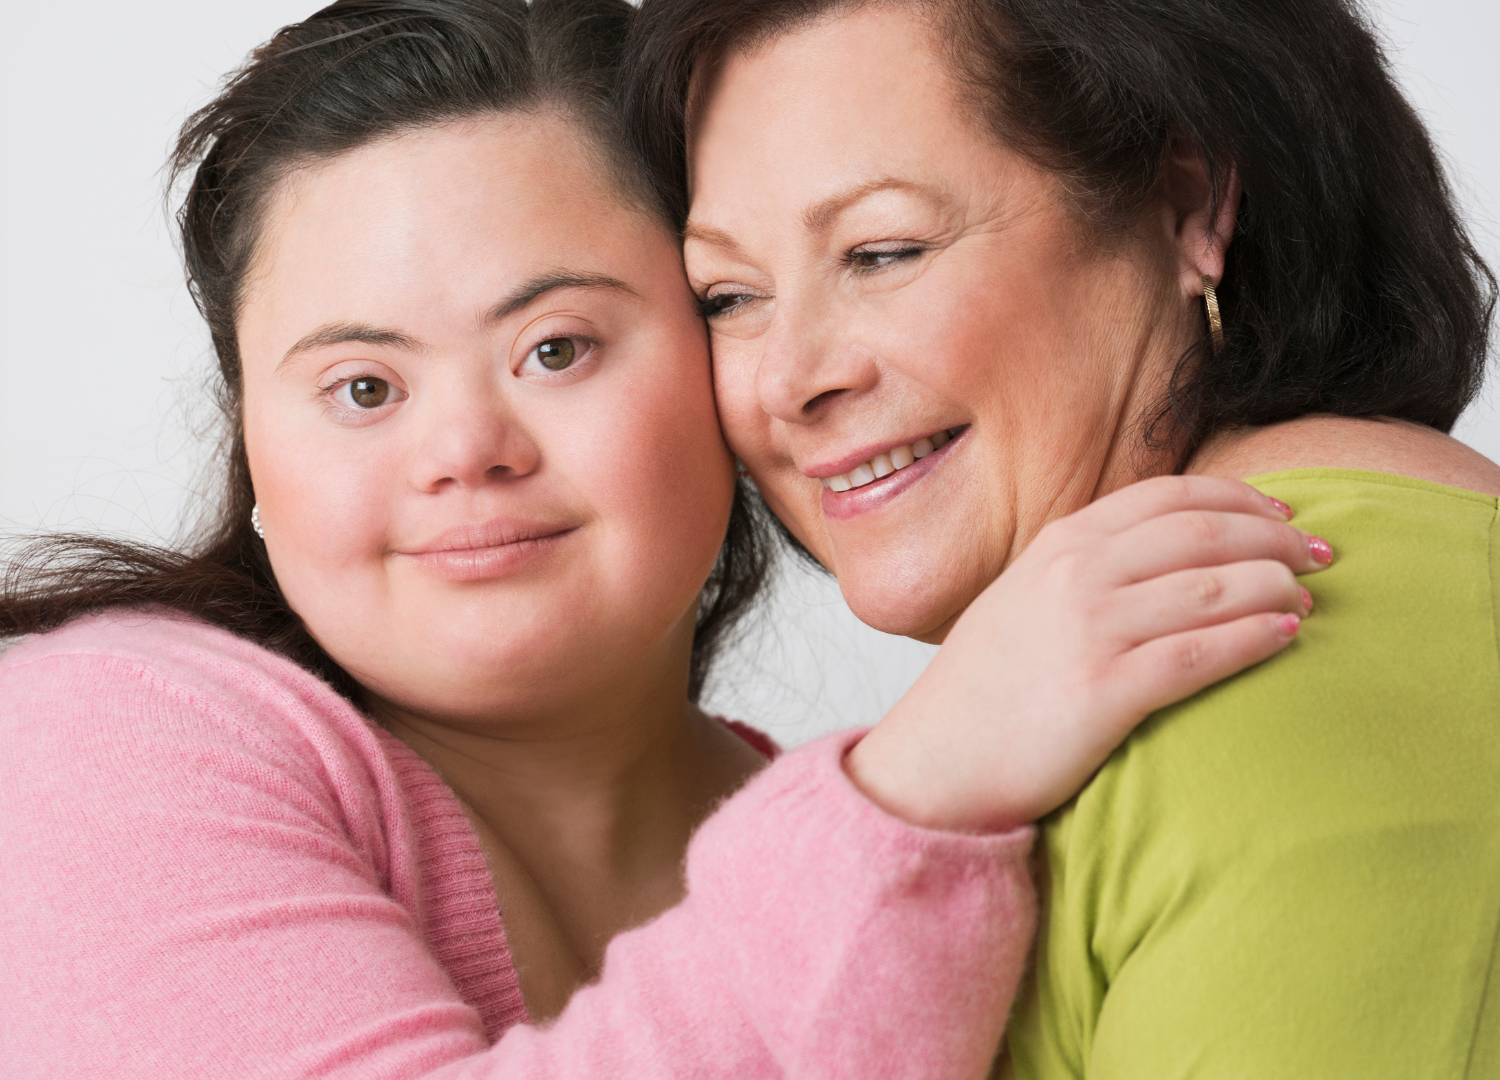 A young woman with Down syndrome and her mother.